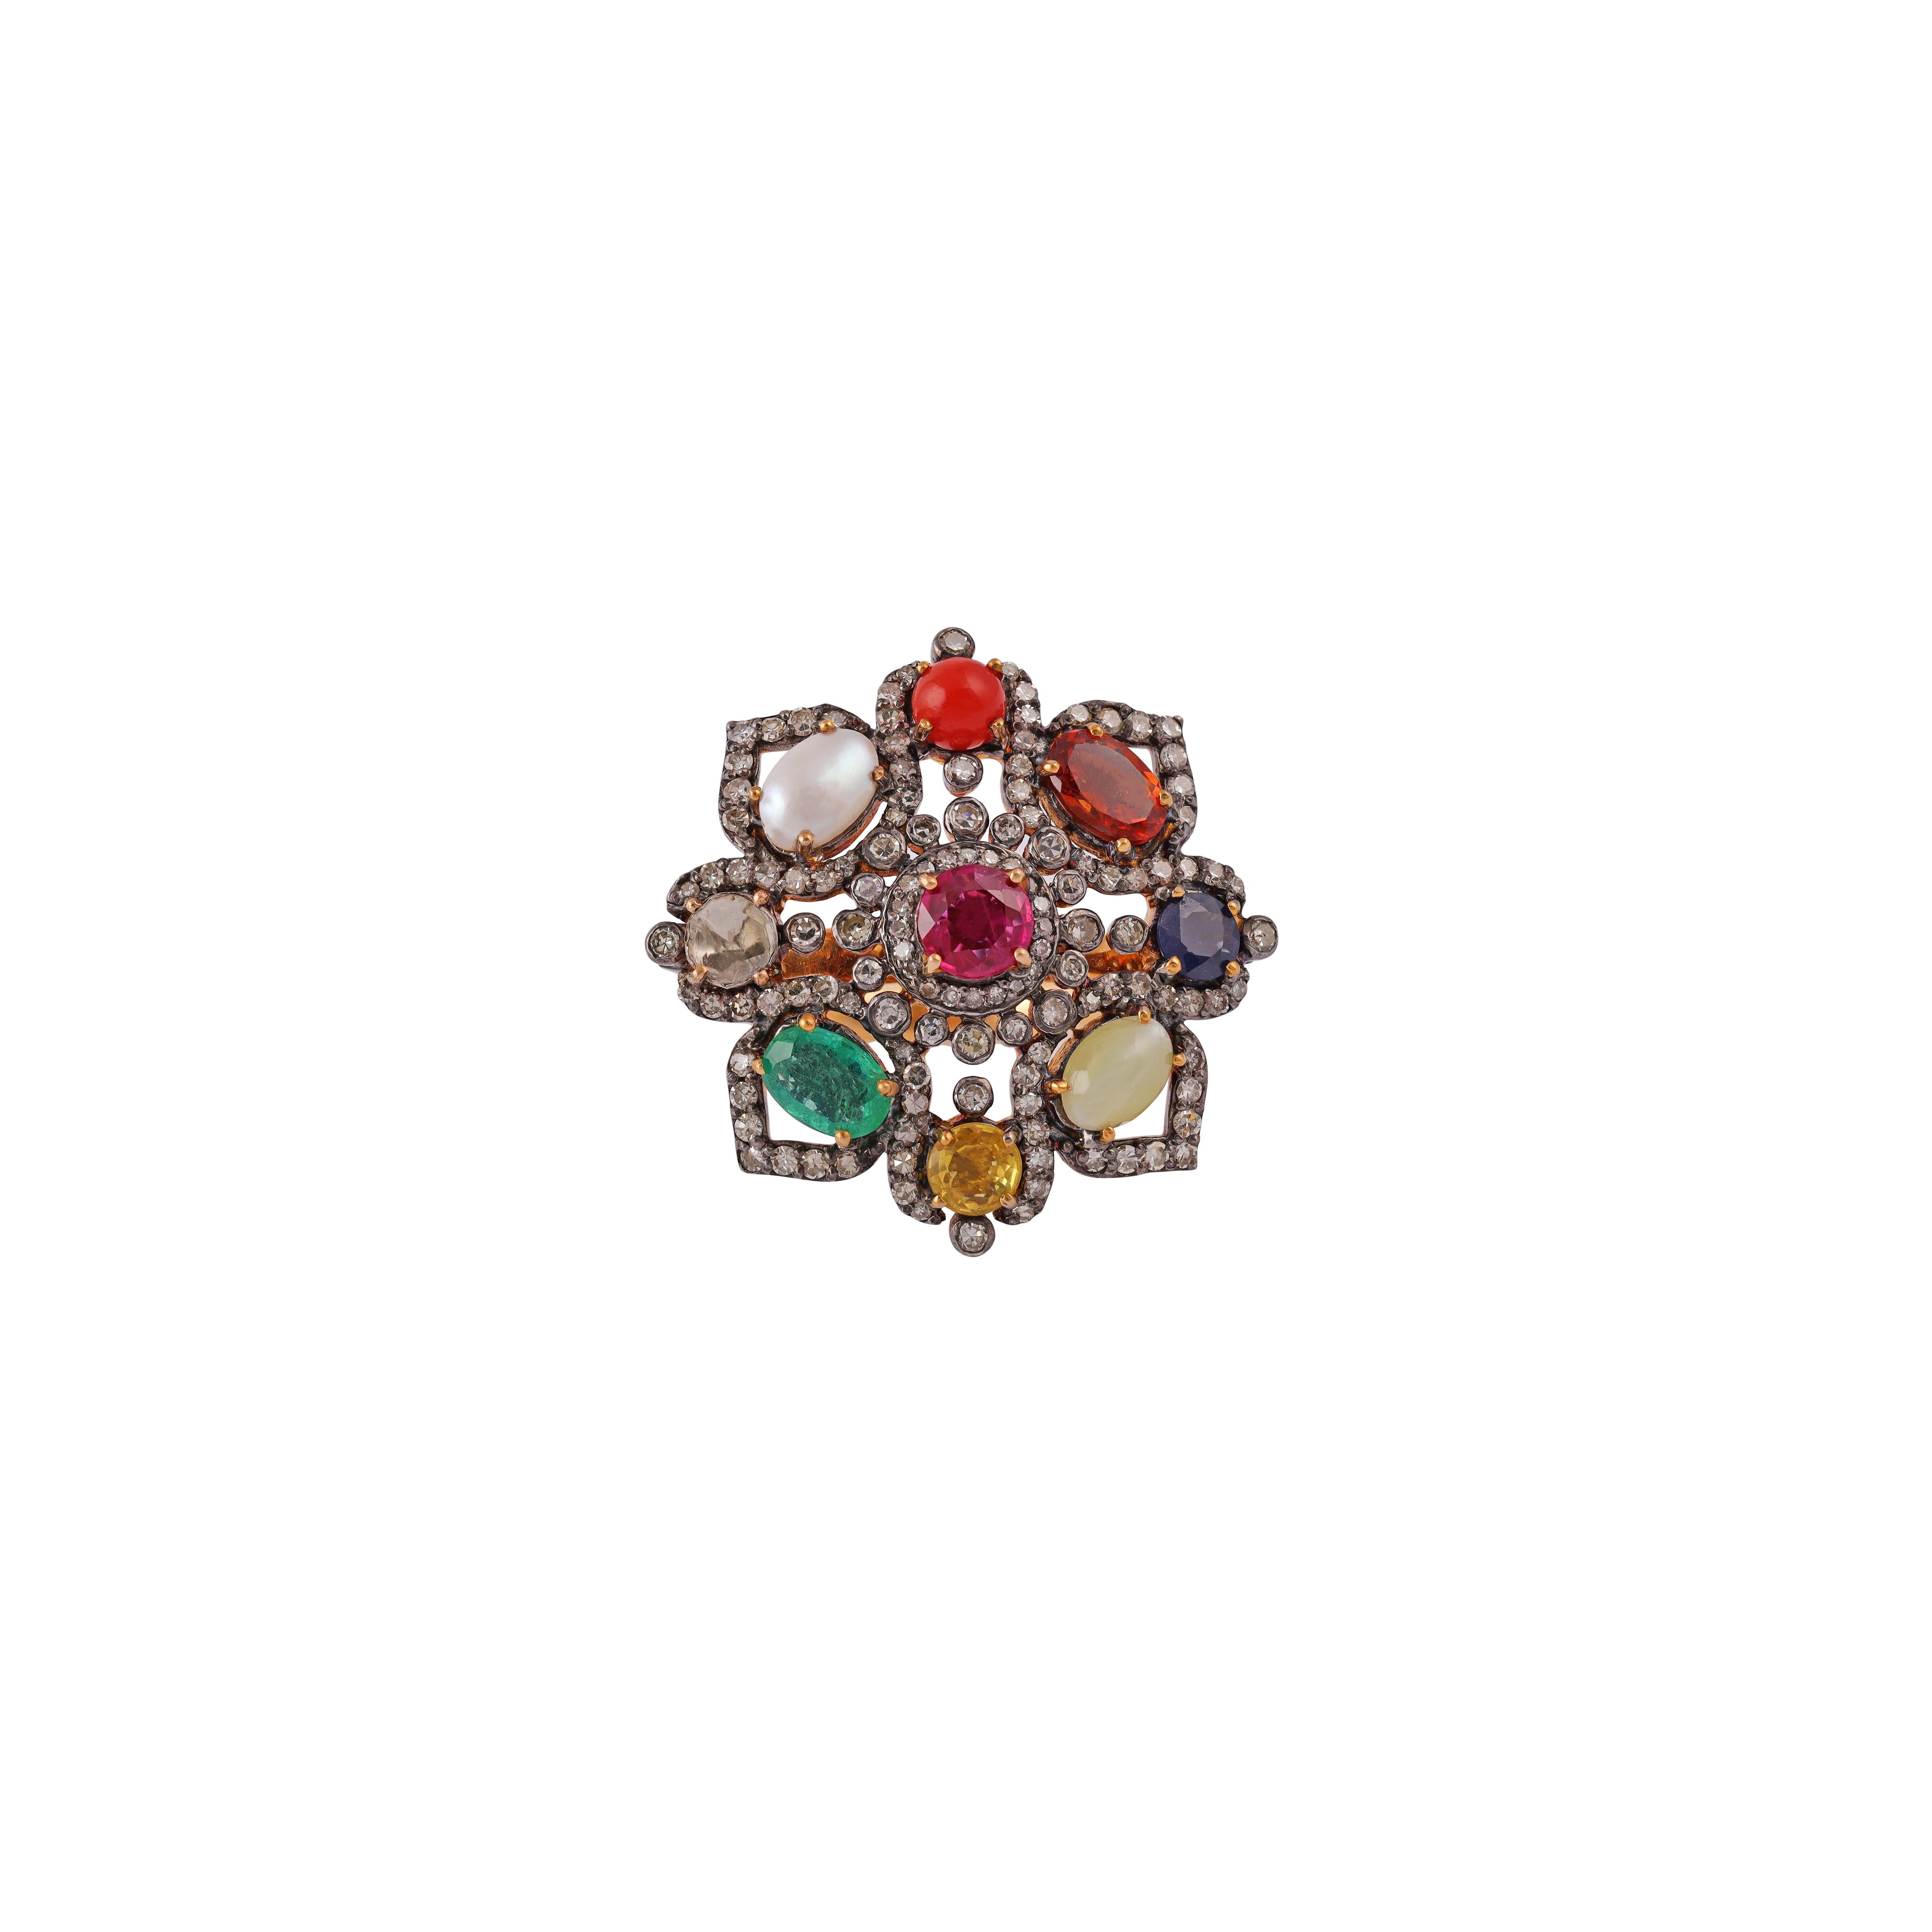 9-Gems (Ruby, Blue Sapphire, Emerald, Yellow Sapphire, Cat's Eye, Uncut Diamond , Moon Stone, Garnet) 2.07 carats with Diamond 1.08 carat Ring set in 18 Karat Gold And silver.

Gold -1.86 gm
silver - 4.3 gm
The 9-gems are believed represent good